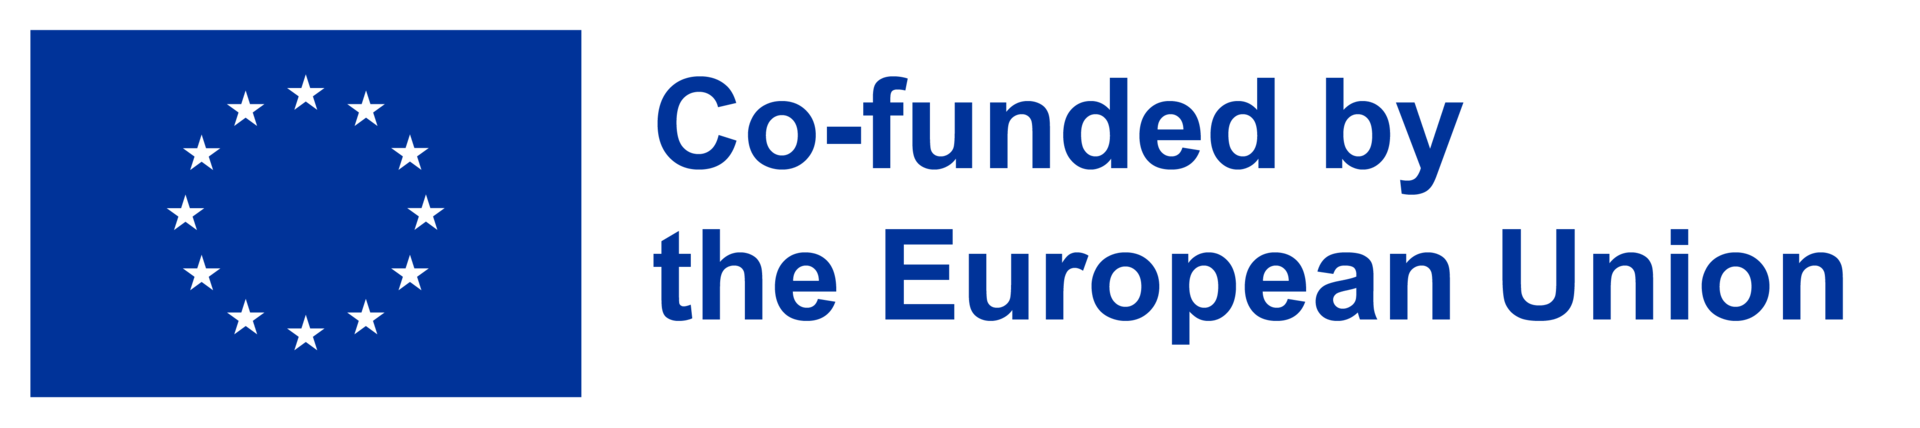 EU logo, text in picture: cofunded by the European Union